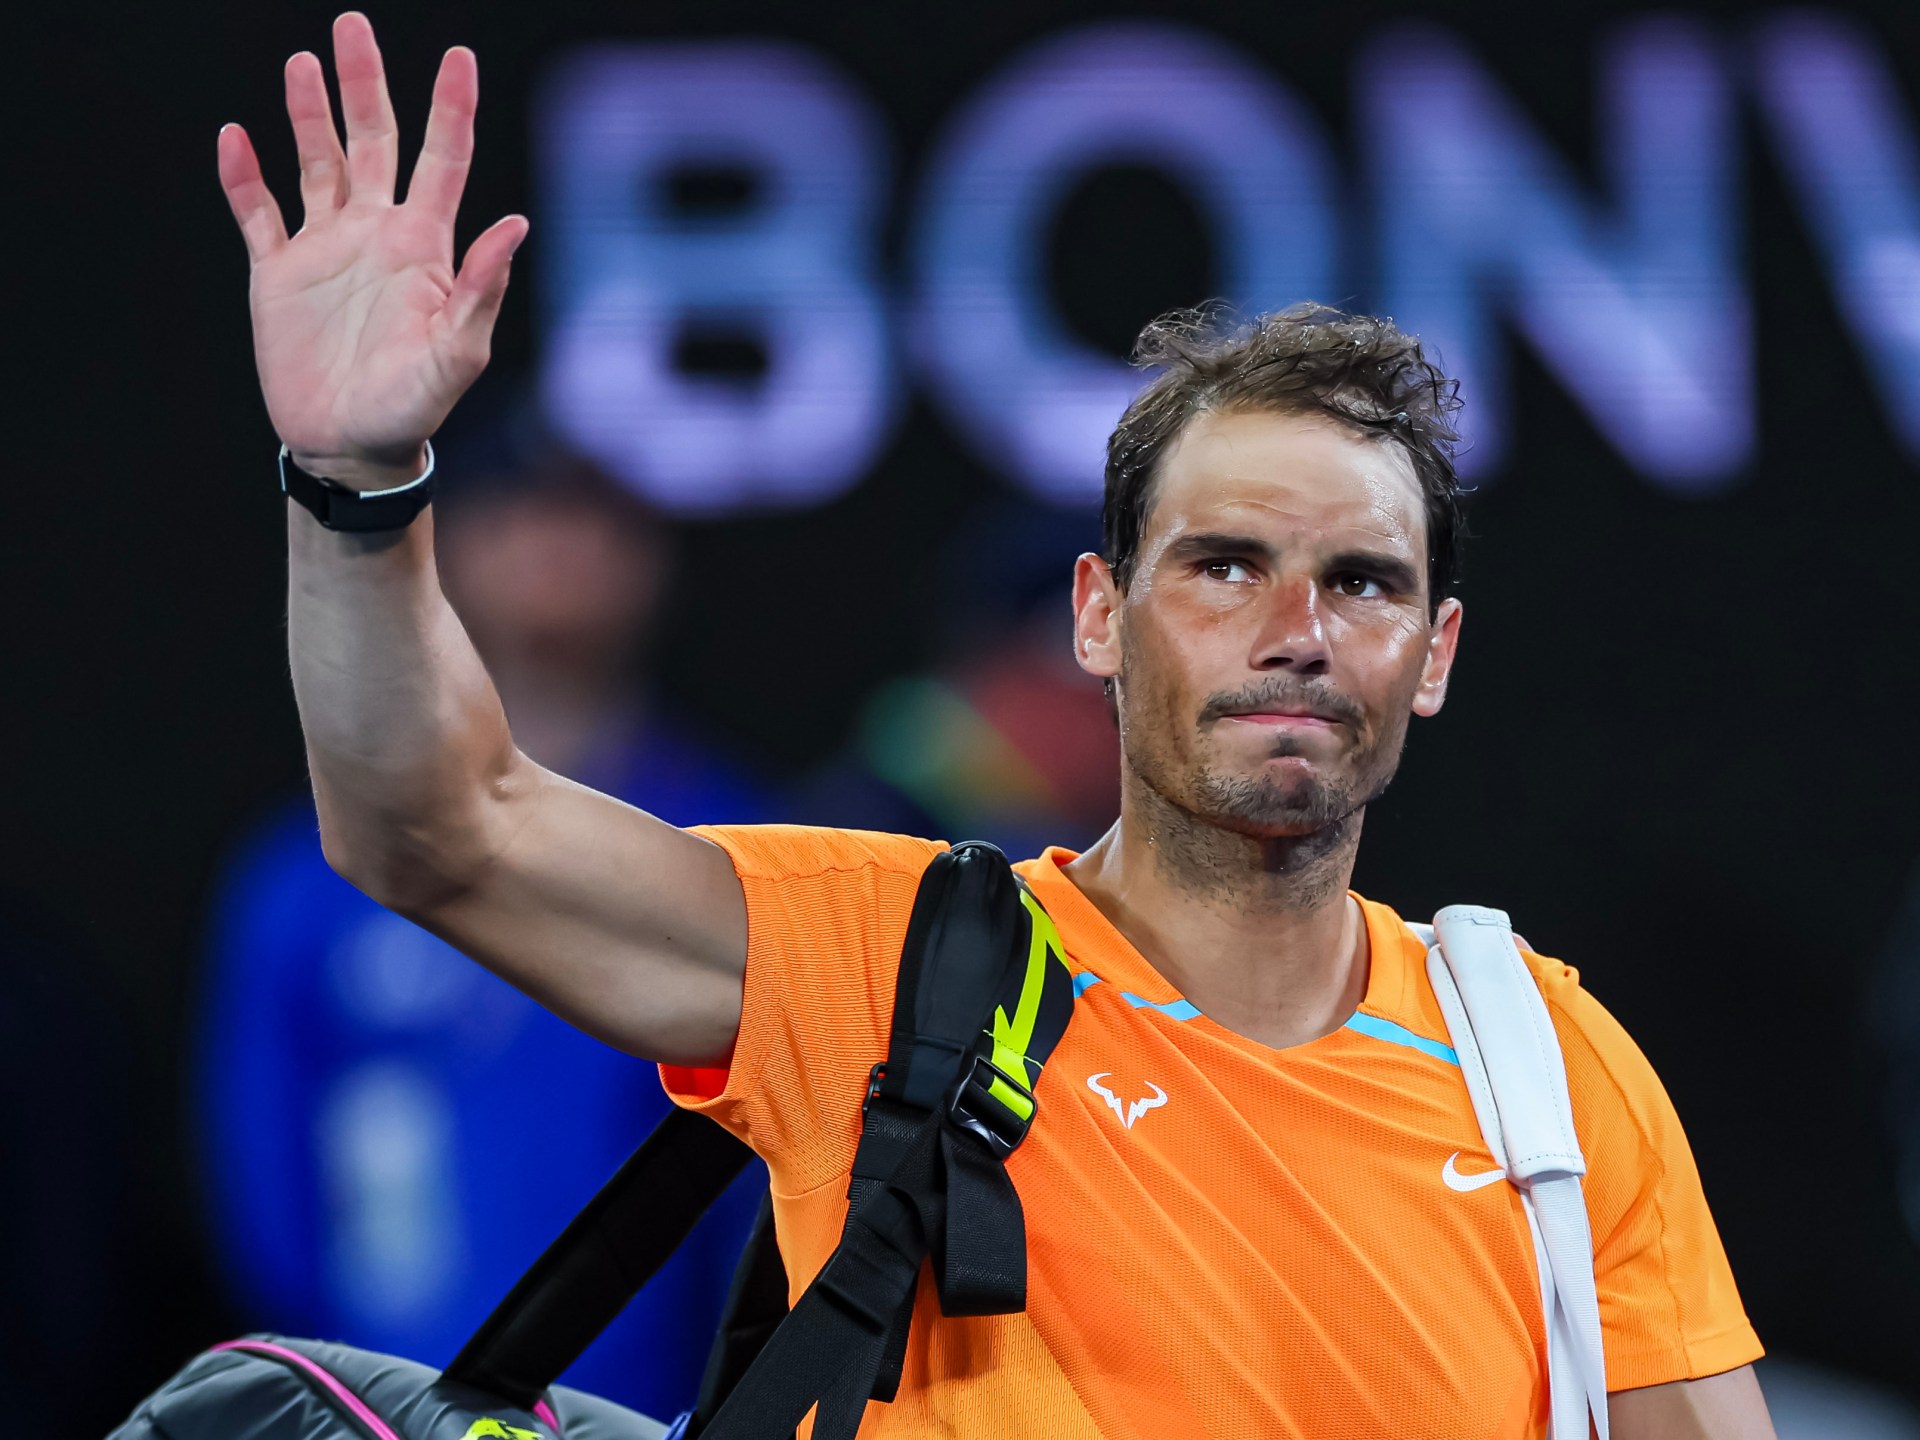 Rafael Nadal drops out of top 10 for first time since 2005 | Tennis News